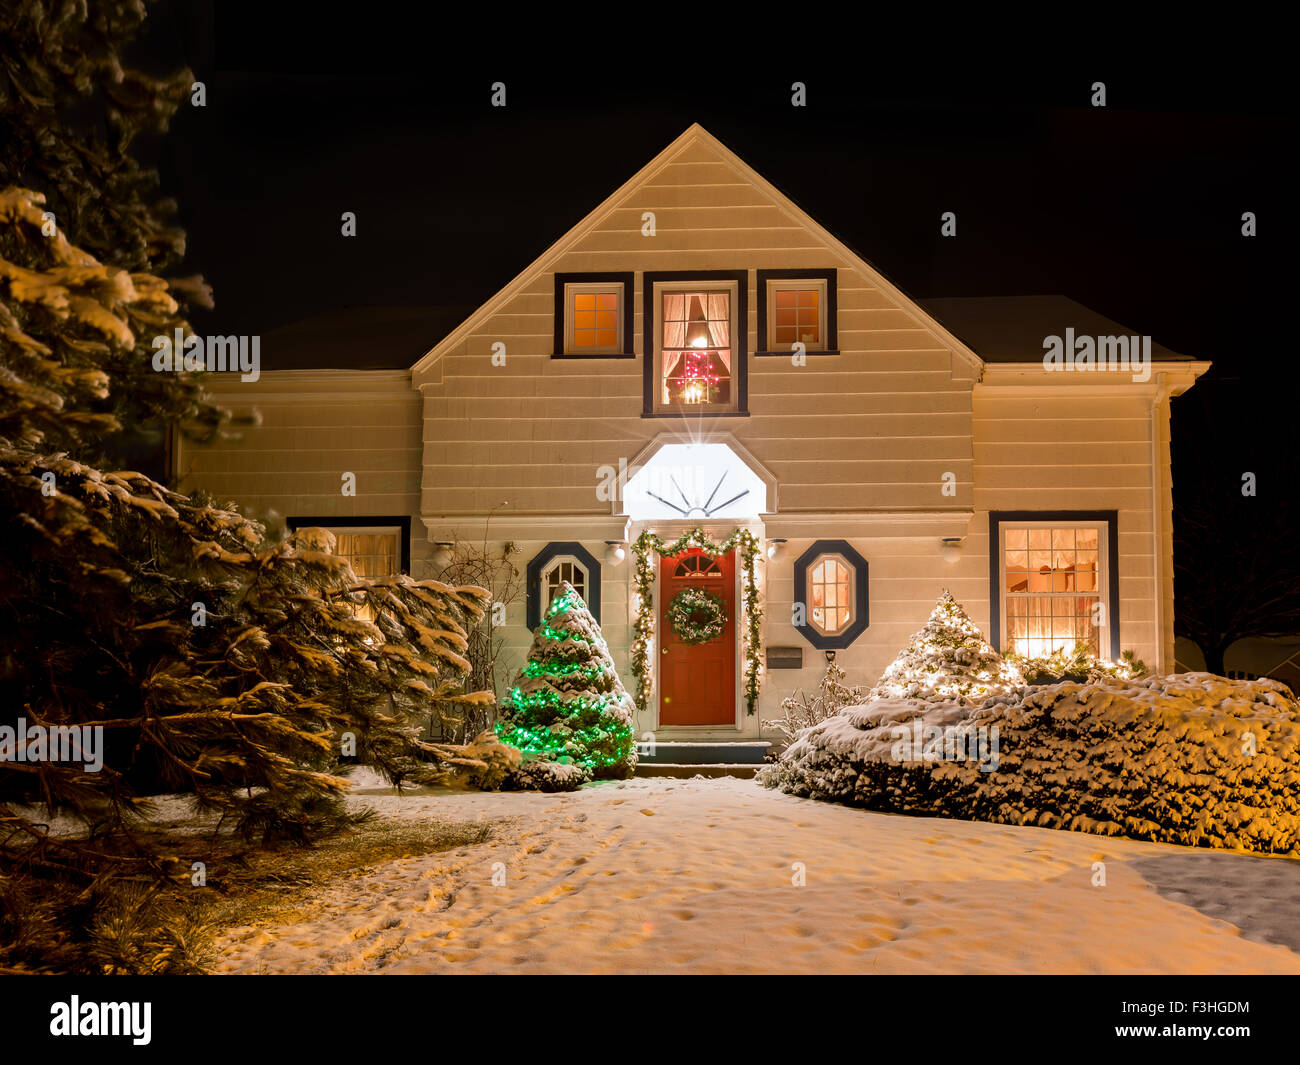 A house decorated with a wreath, garland and Christmas lights an a clear winter night. Stock Photo